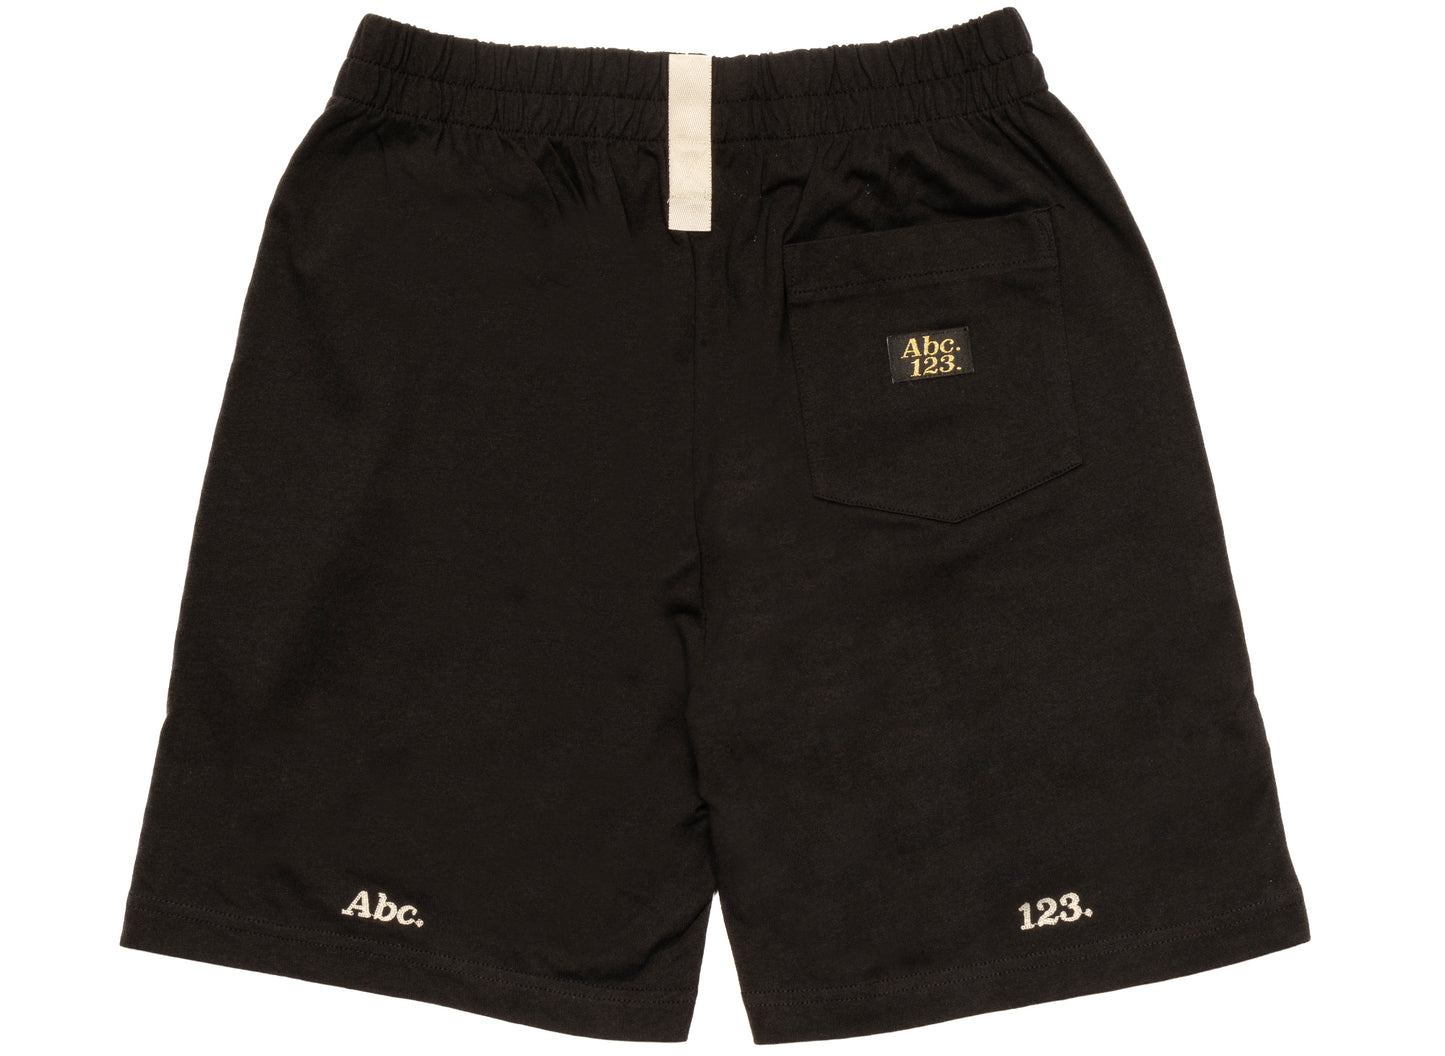 Advisory Board Crystals Abc. 123. Lounge Shorts in Anthracite